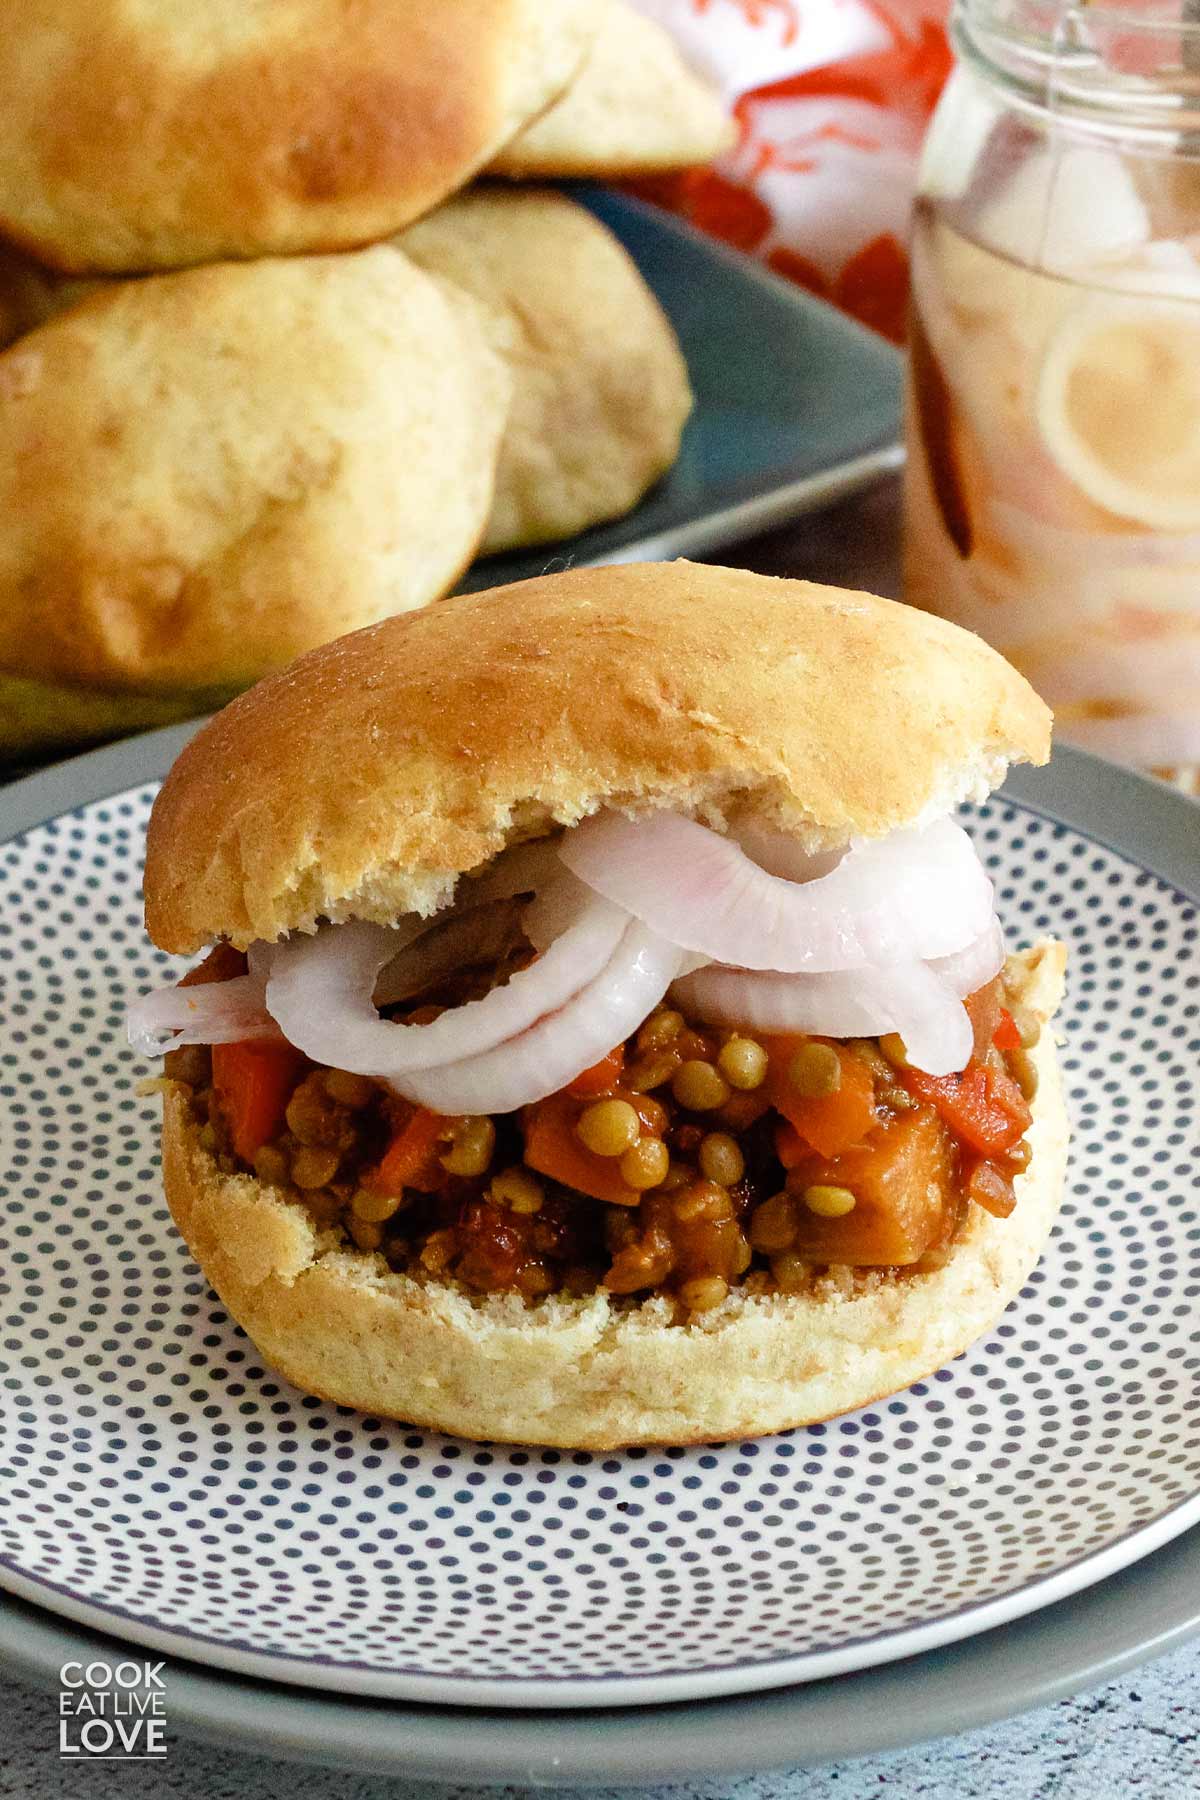 Vegan sloppy joes on a plate with stack of buns behind.